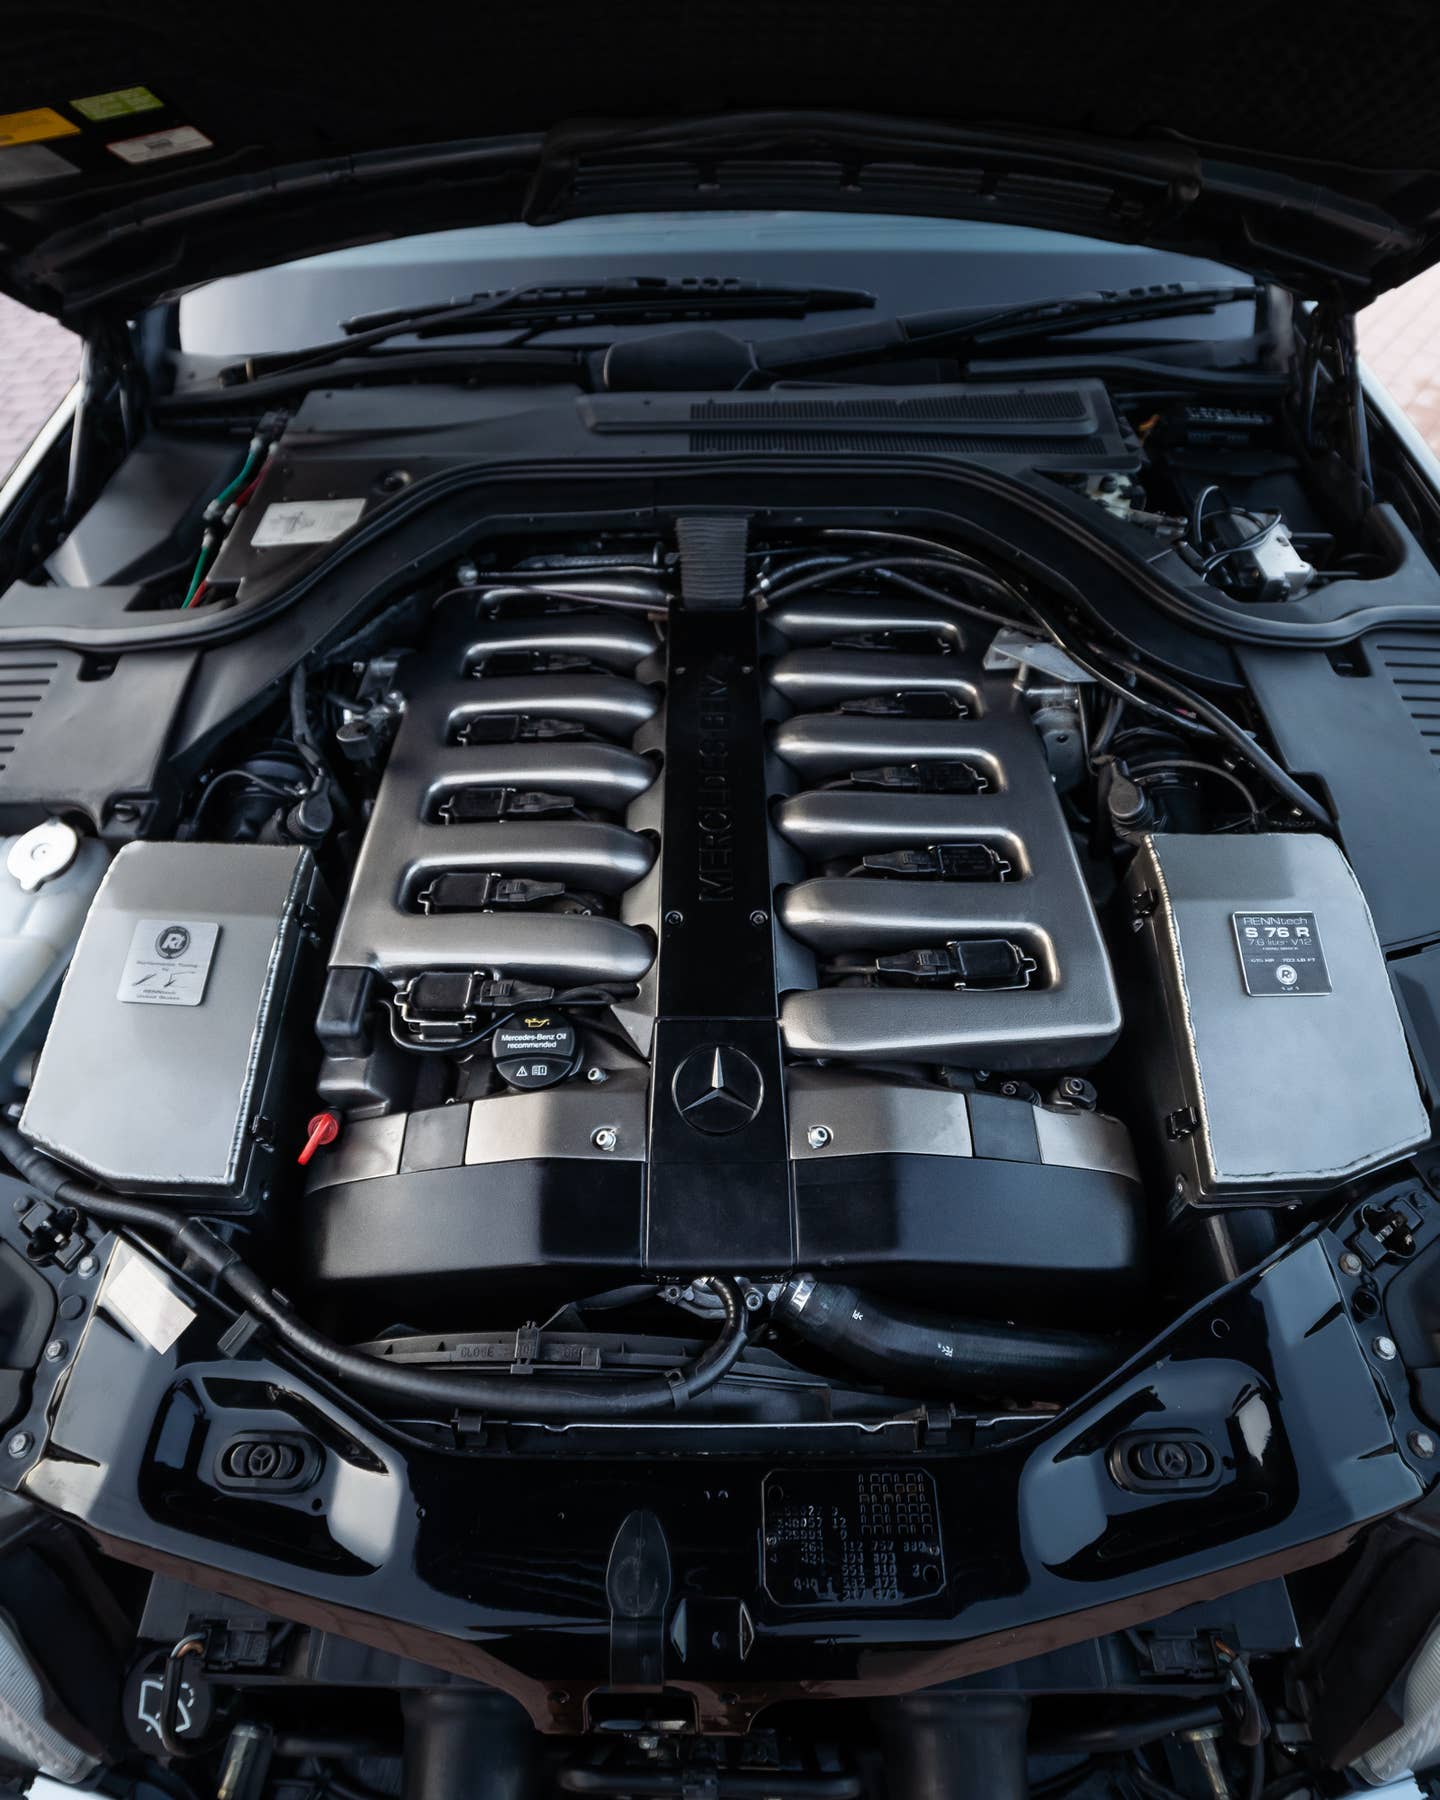 Mercedes had perfected engine bay looks by the early 1990s. Plastic covers and trim have only taken us backward since then. <em>Renntech</em>